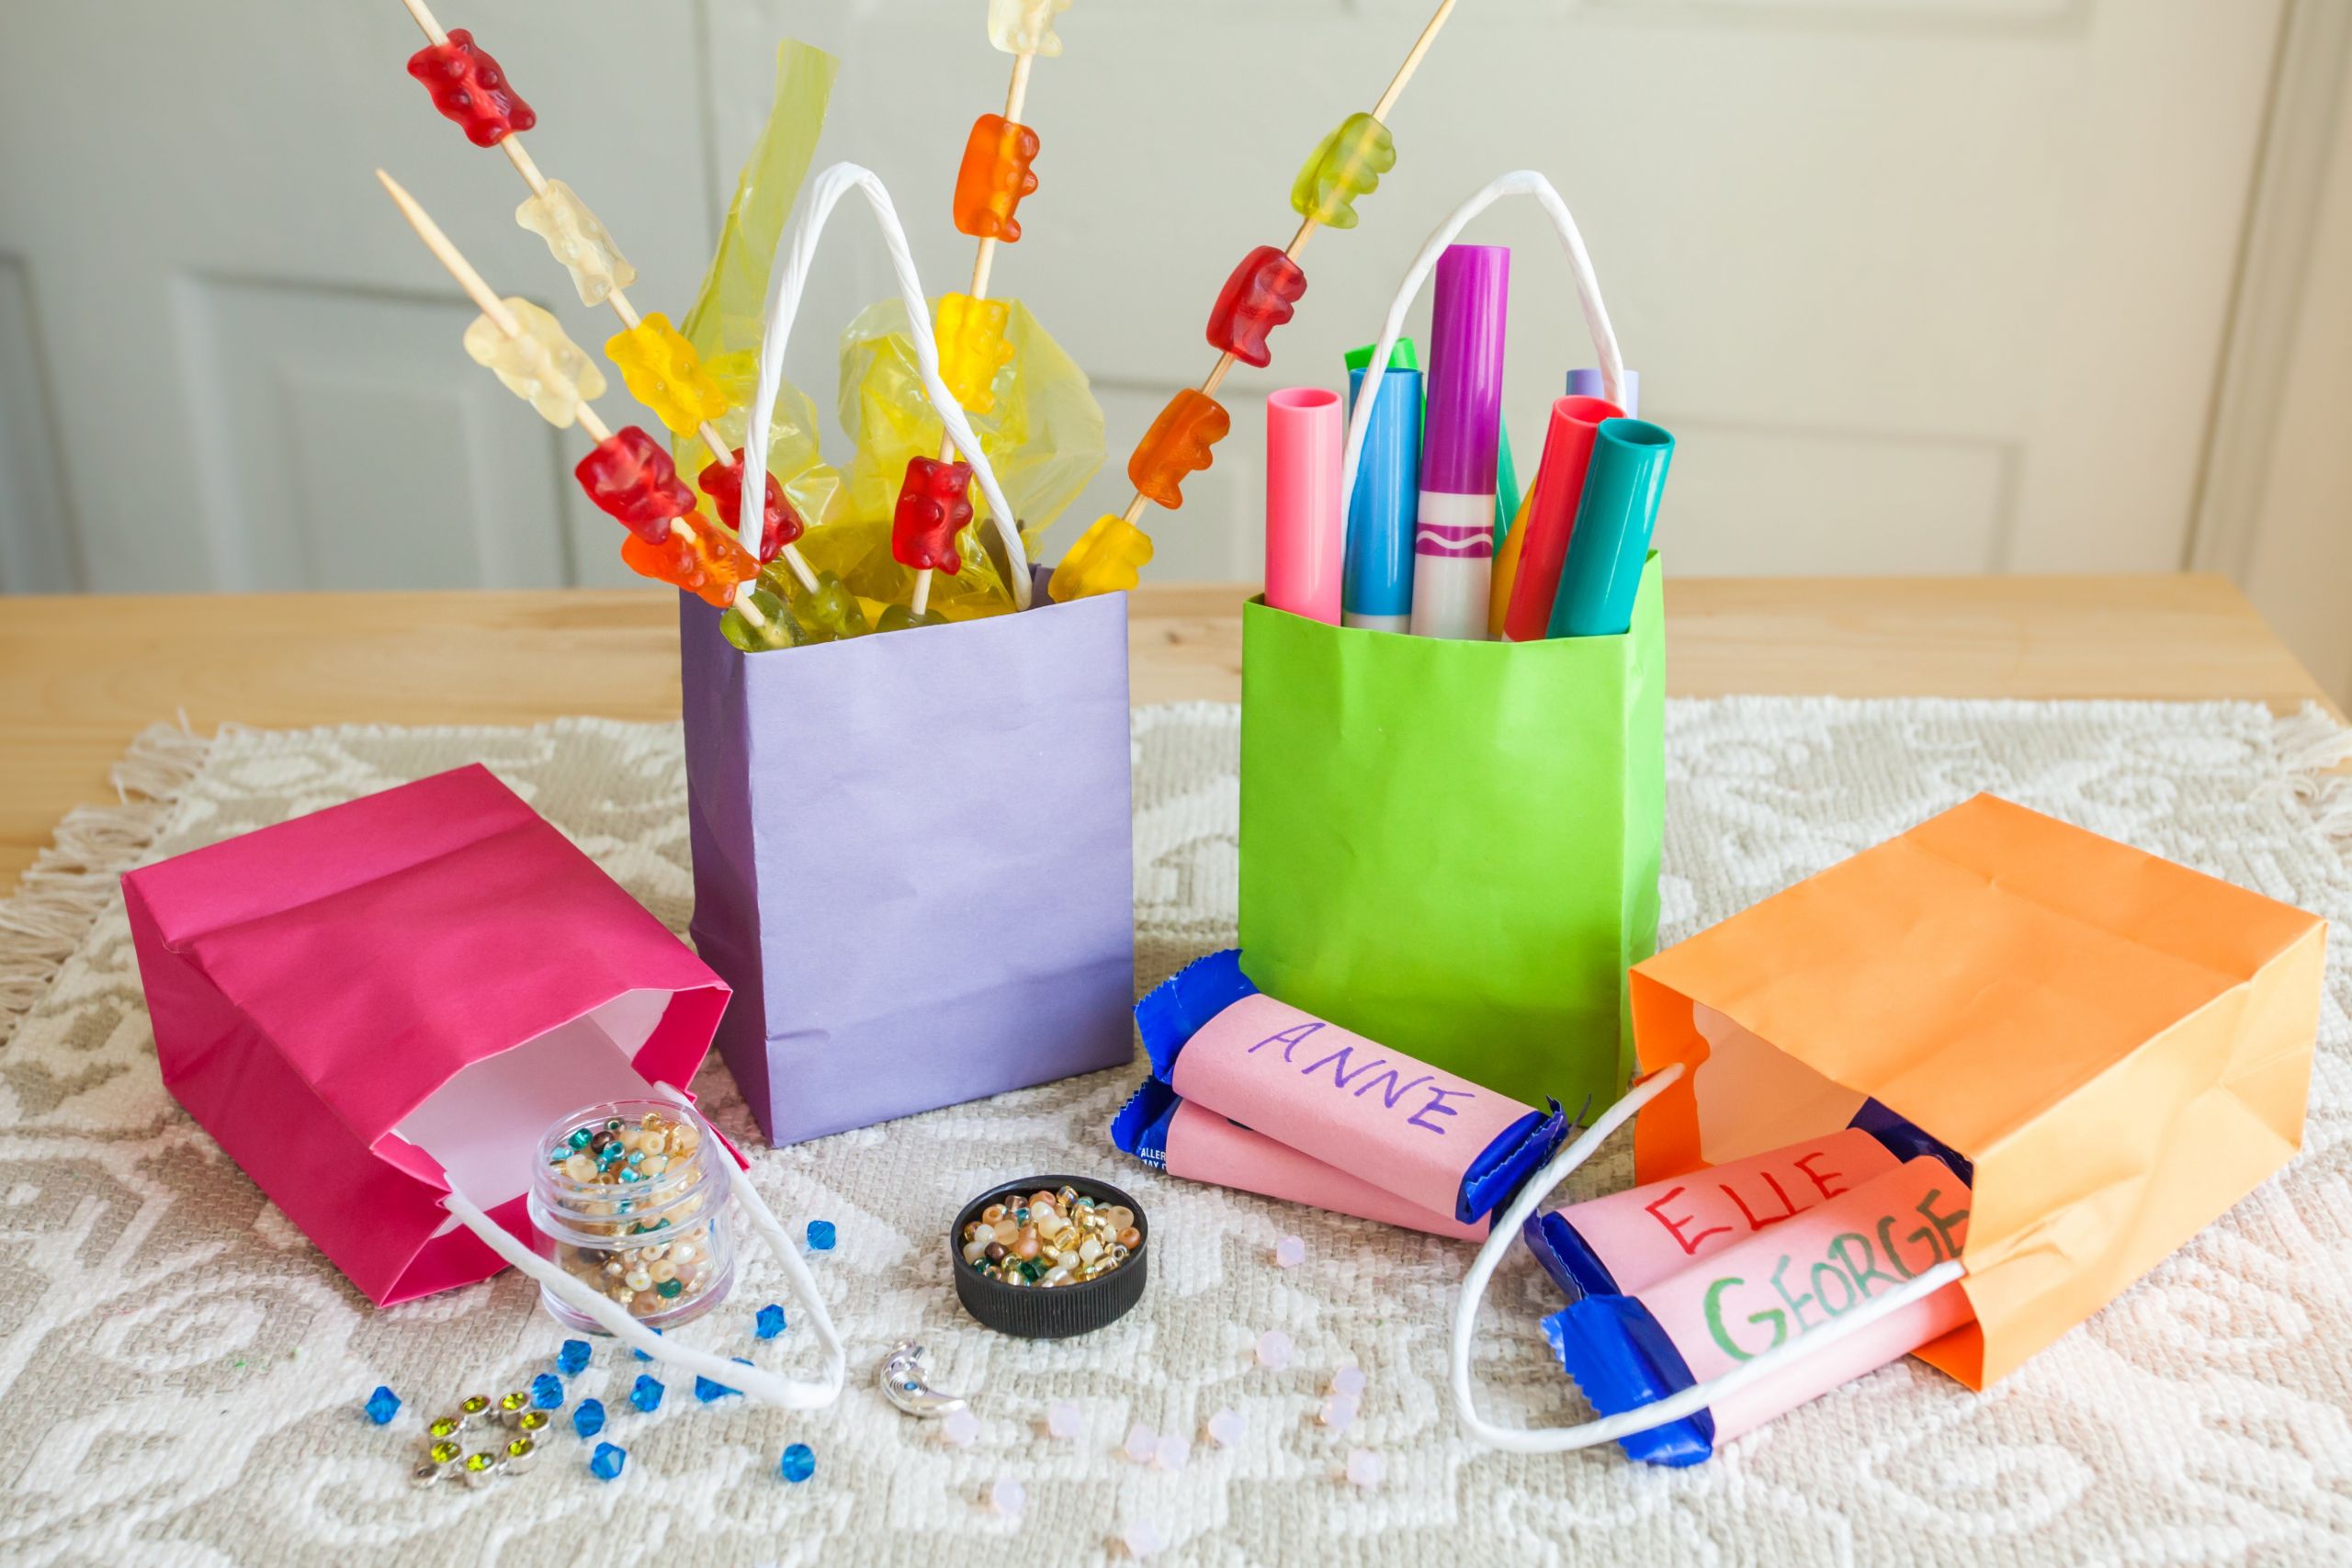 Birthday Party Gift Bag Ideas
 Ideas for Kids Birthday Party Gift Bags with